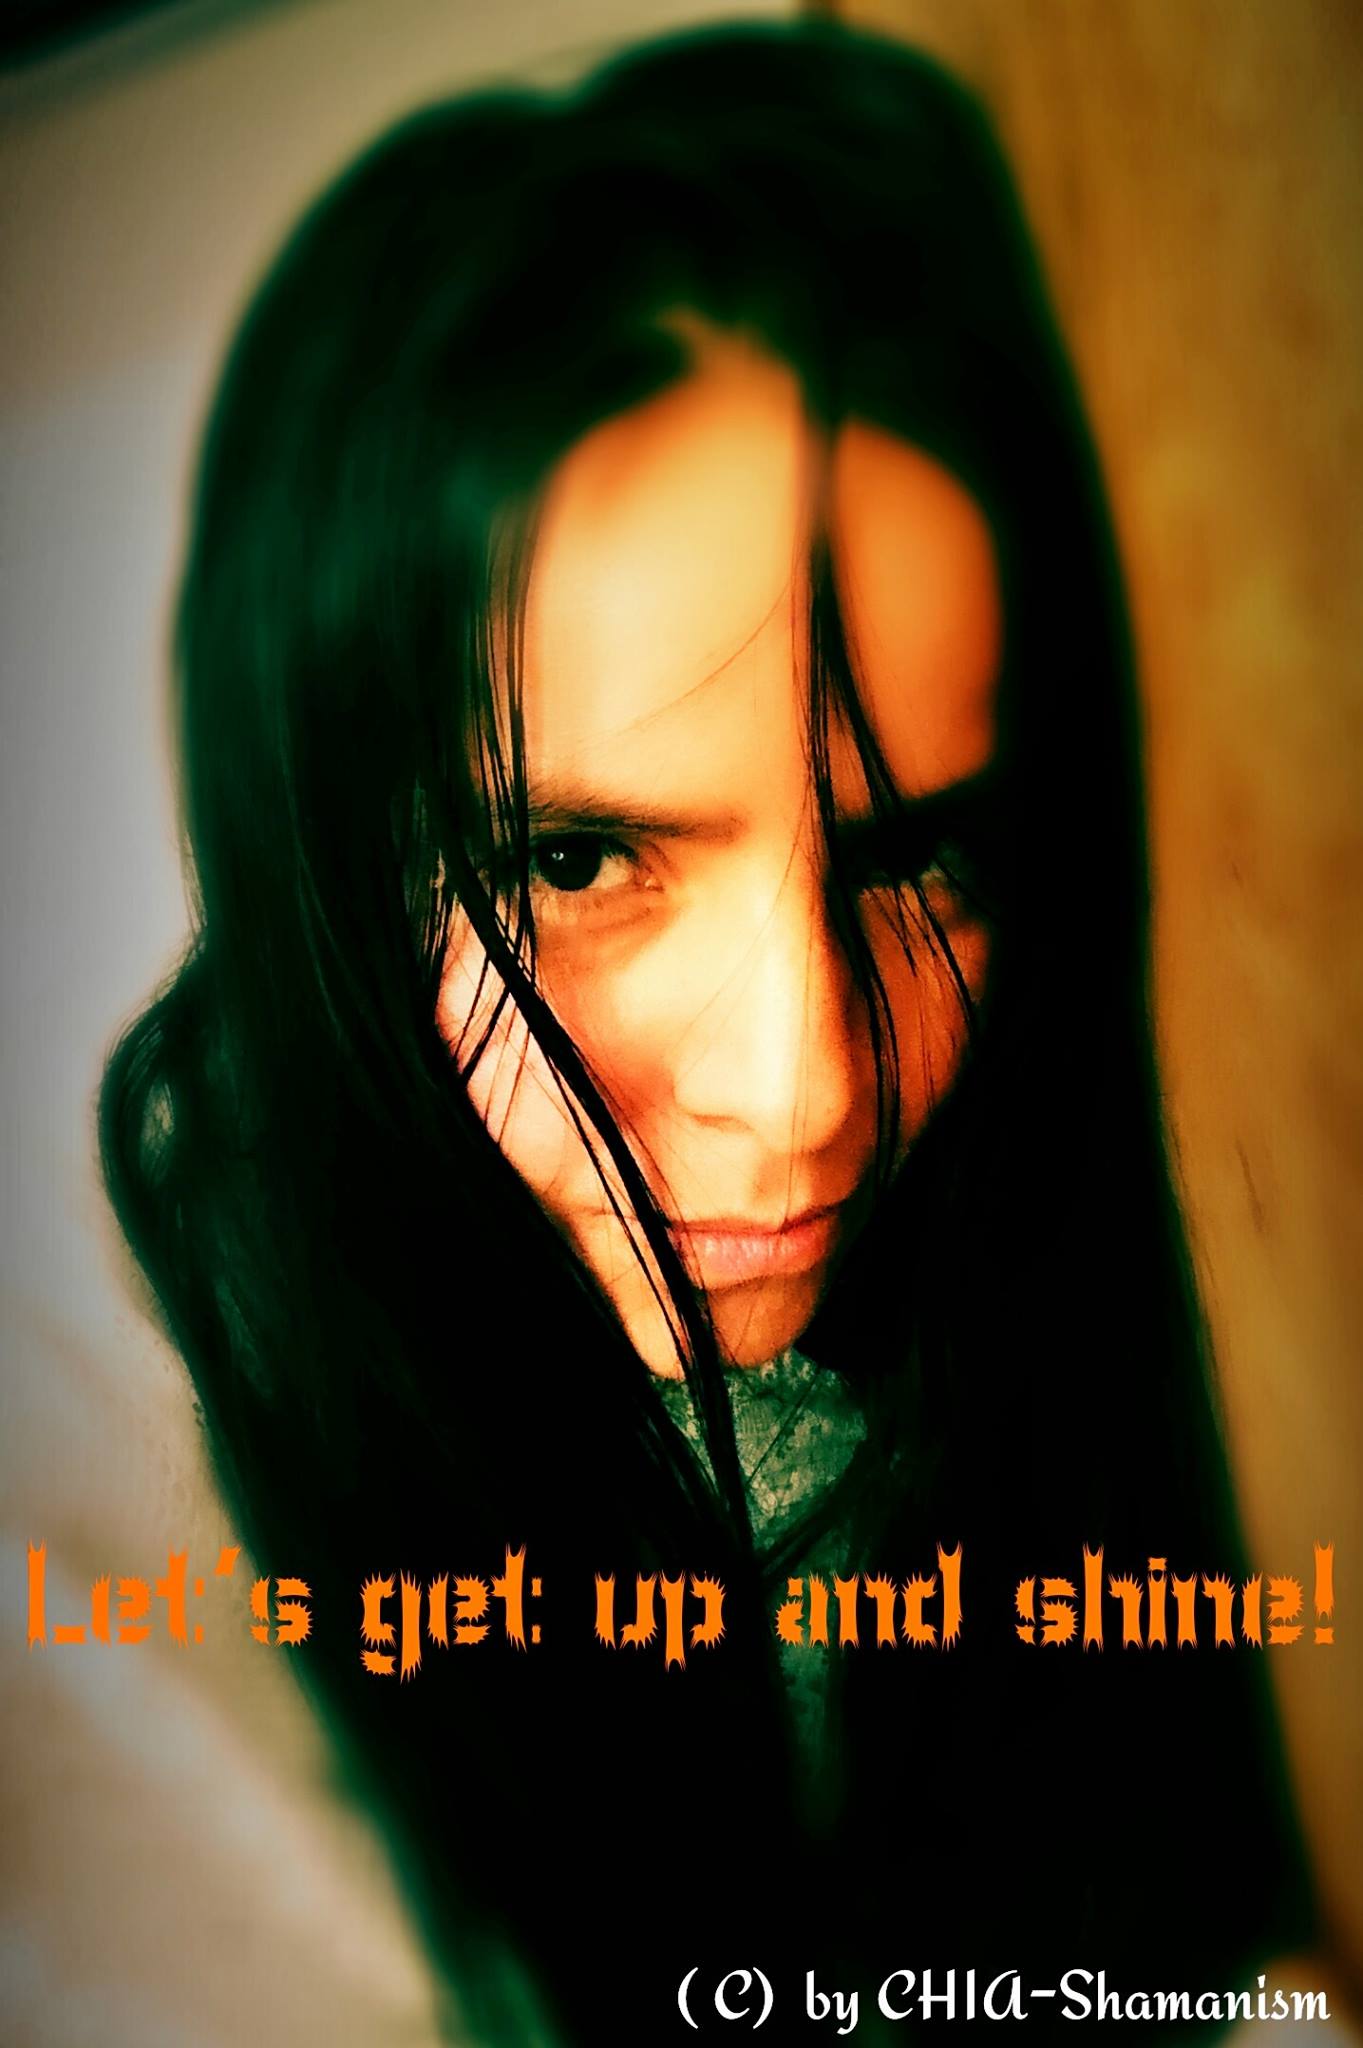 Let’s get up and shine!